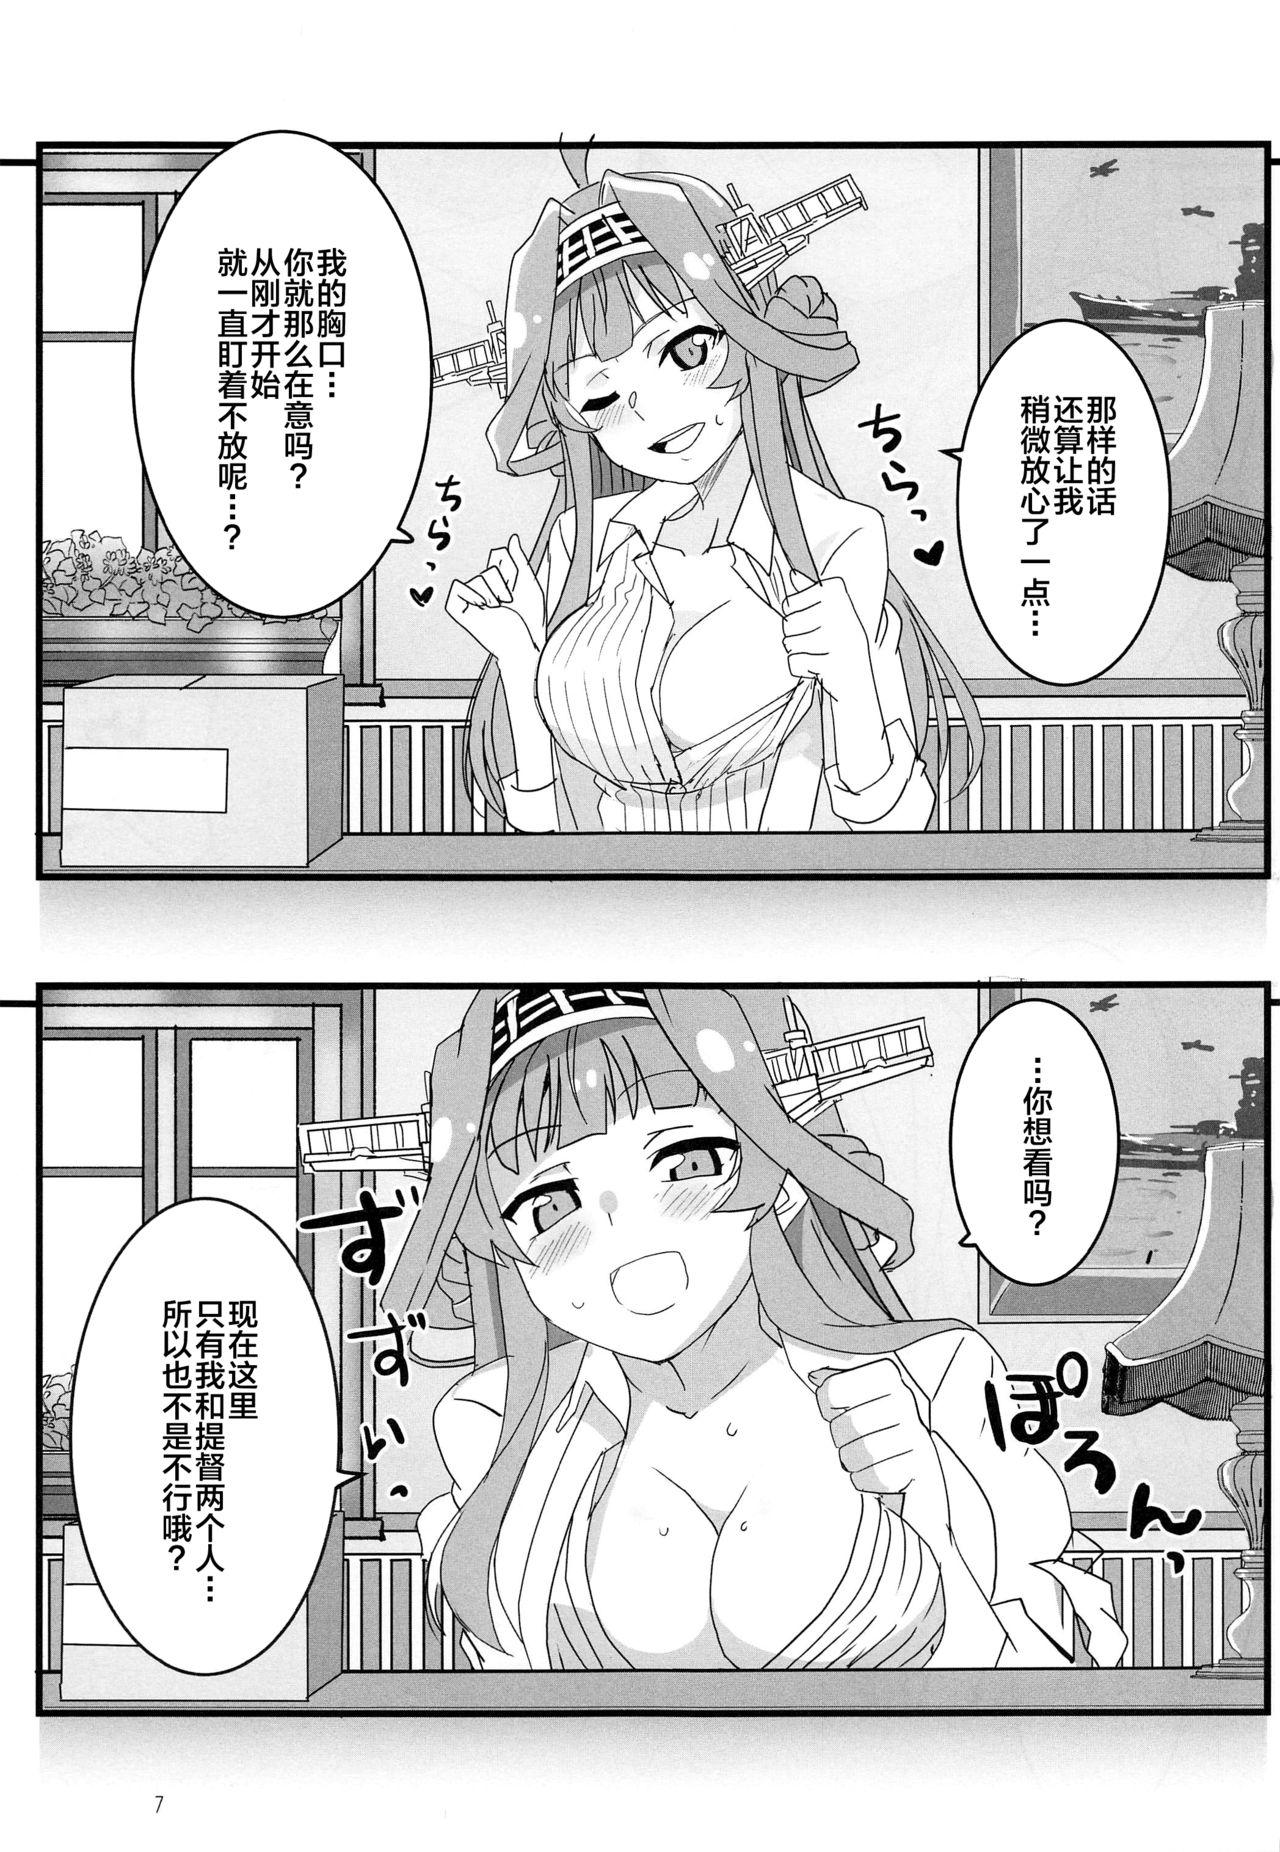 Camwhore Remote Love - Kantai collection Watersports - Page 6